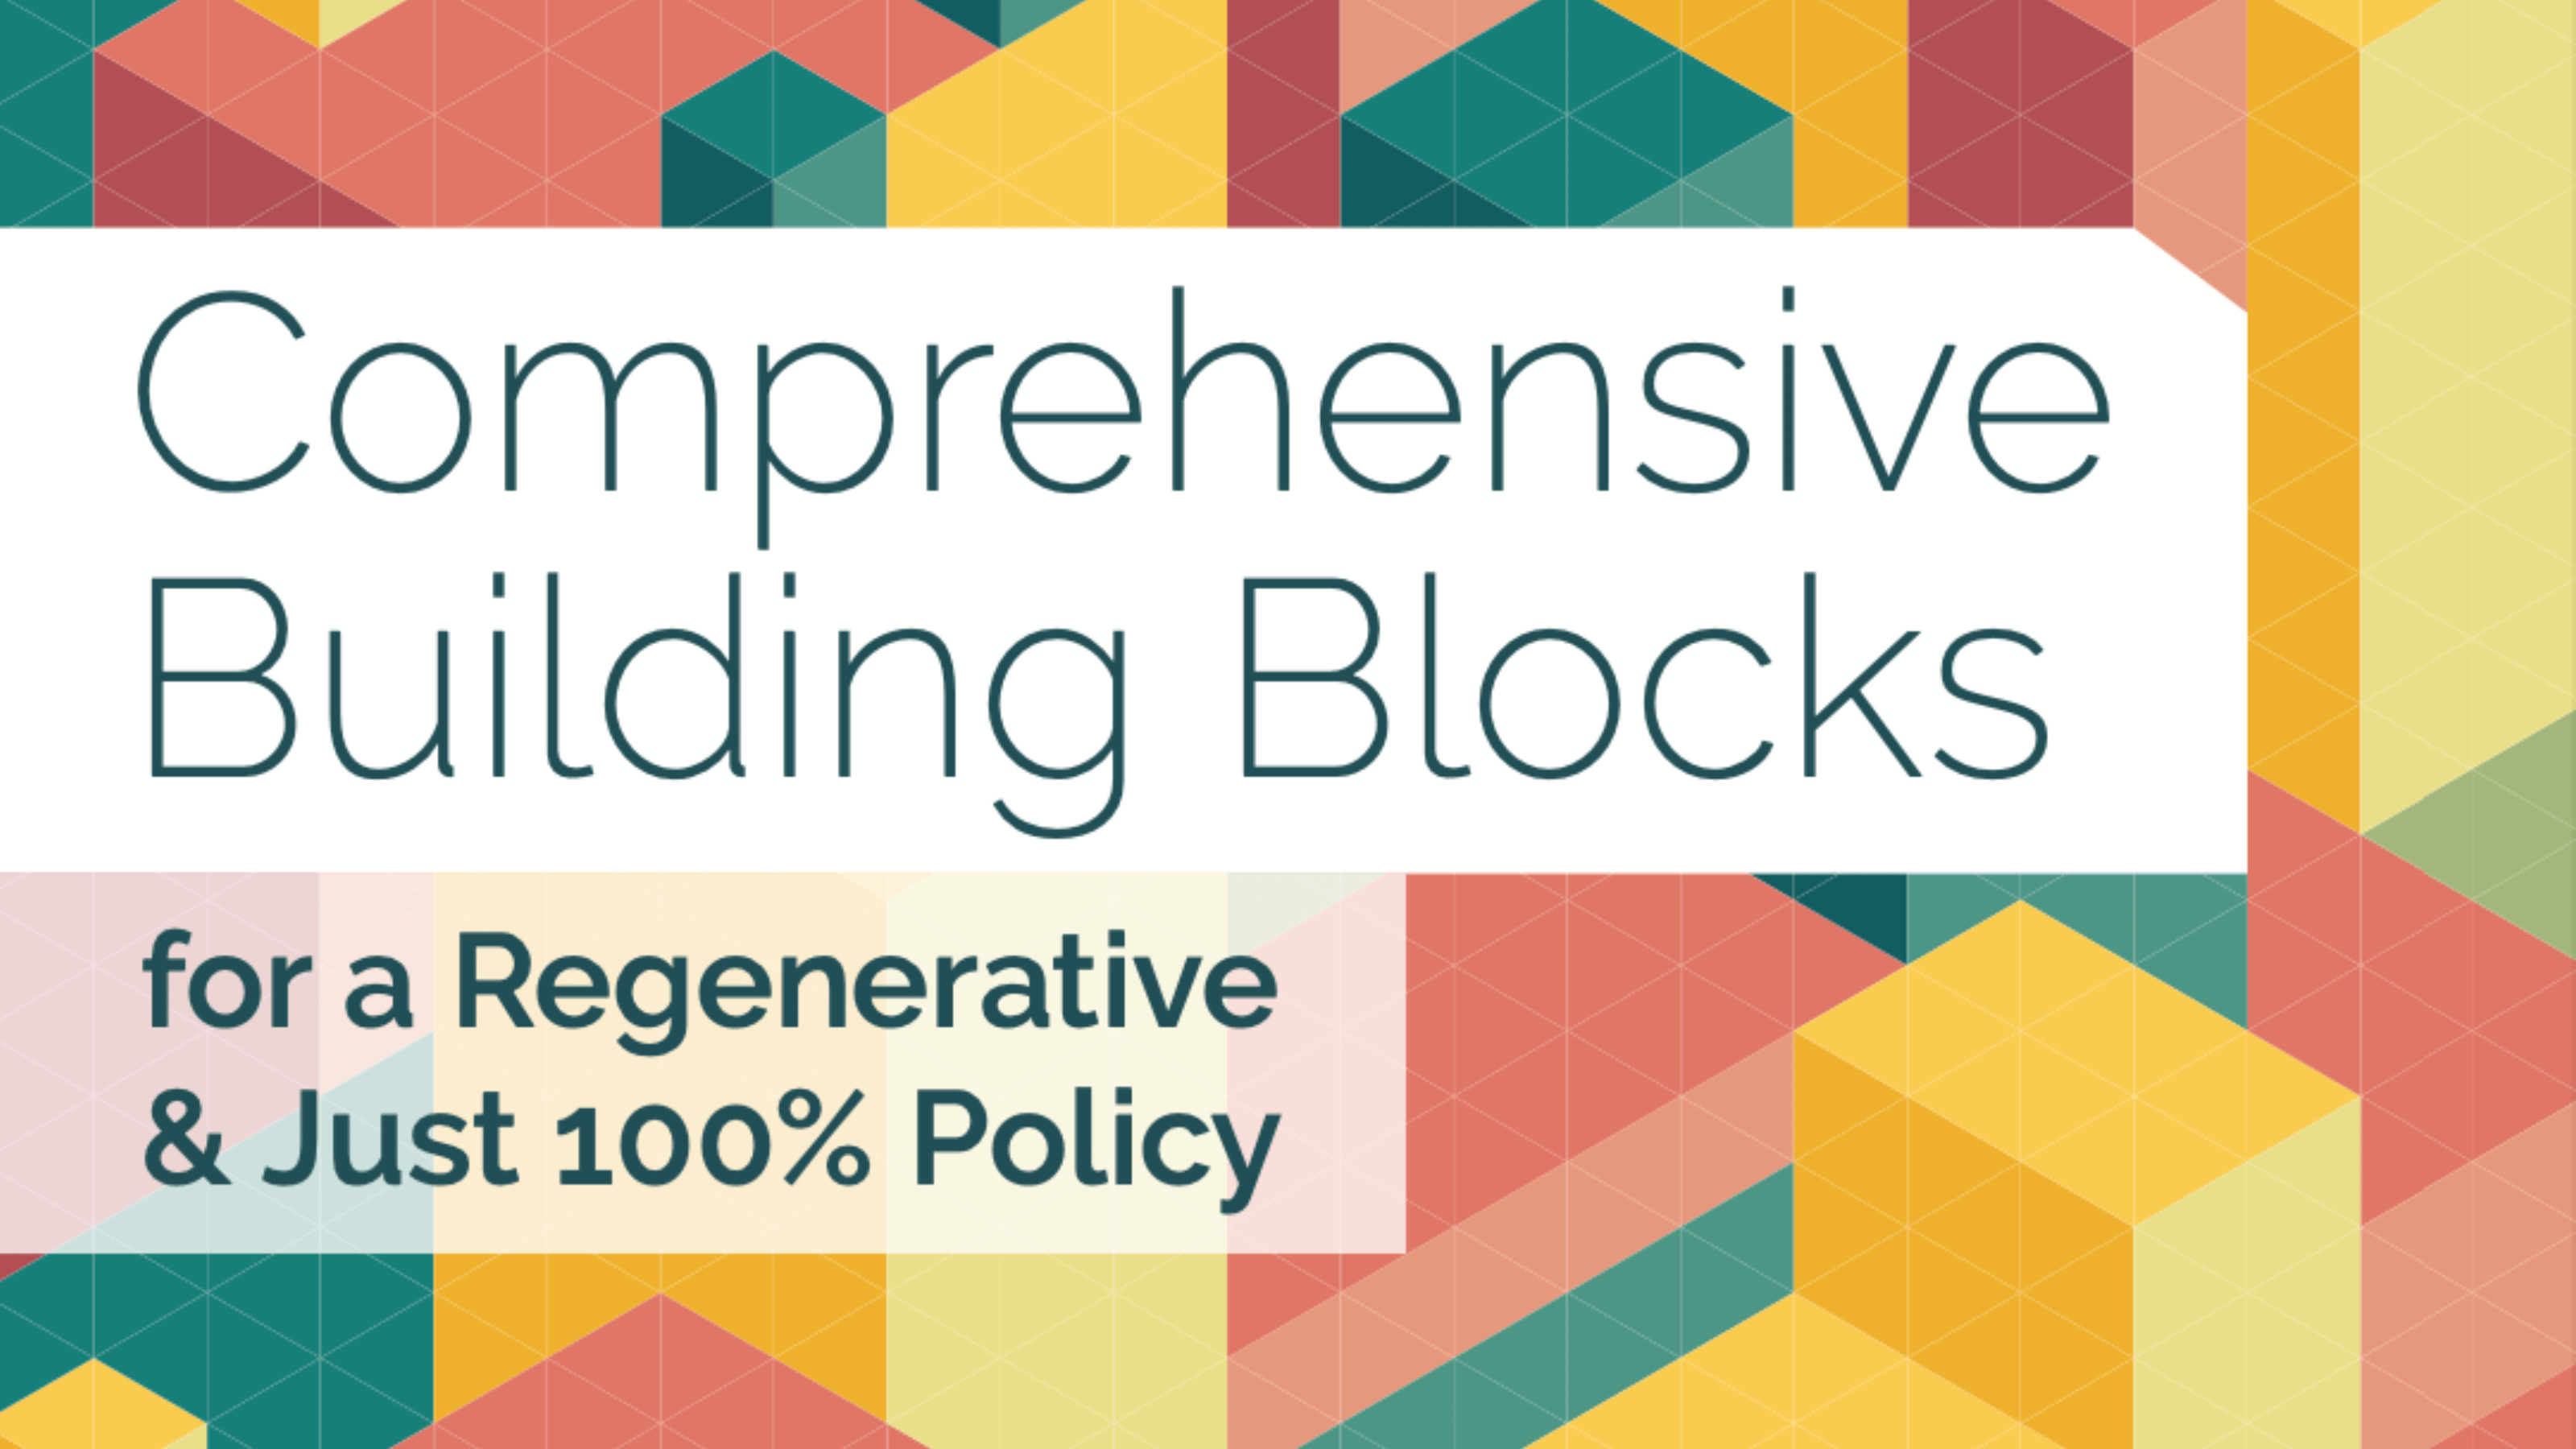 Regenerative & Just 100% Policy Building Blocks Released by Experts from Impacted Communities